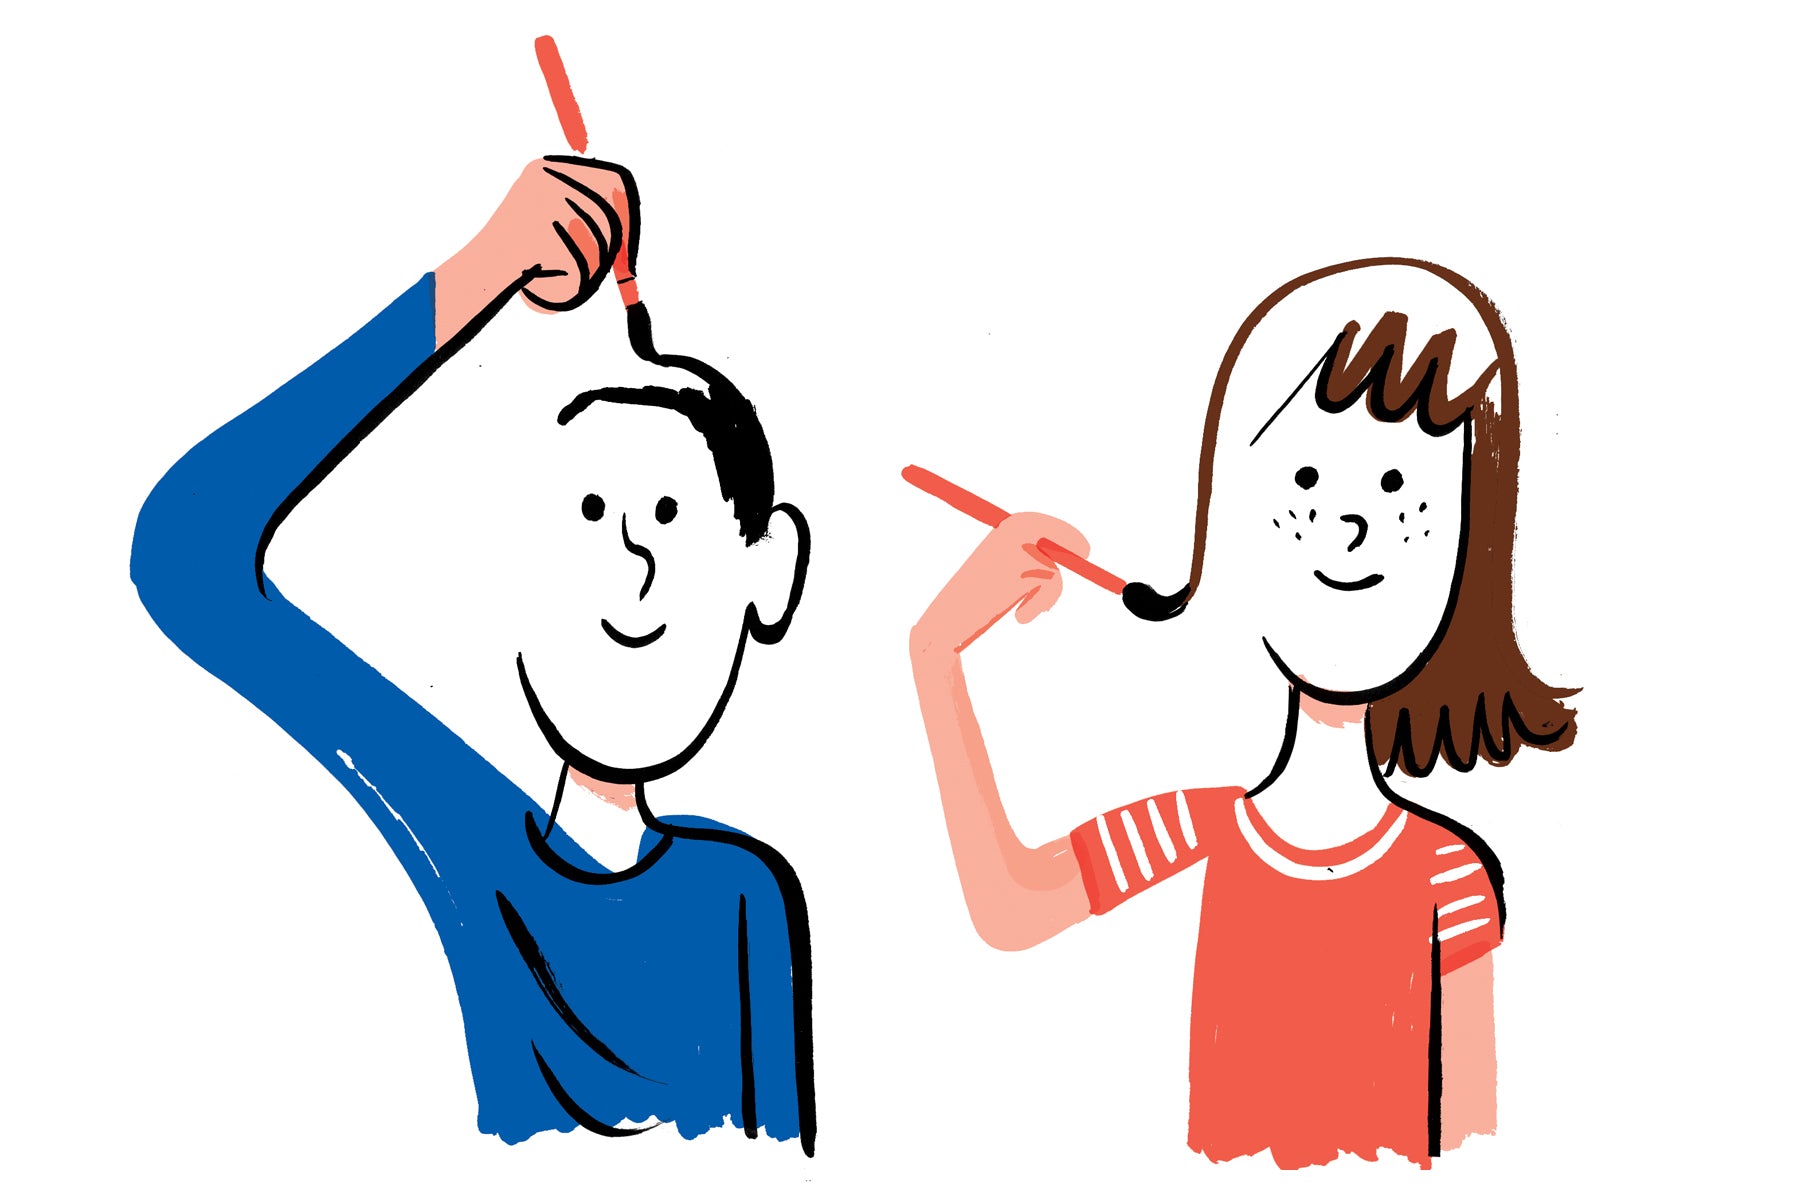 Illustration of a young boy with a blue shirt on and a young girl with a red shirt on drawing their own faces so half of their face is incomplete as they paint in the details themselves. This is a metaphor for introducing themselves.